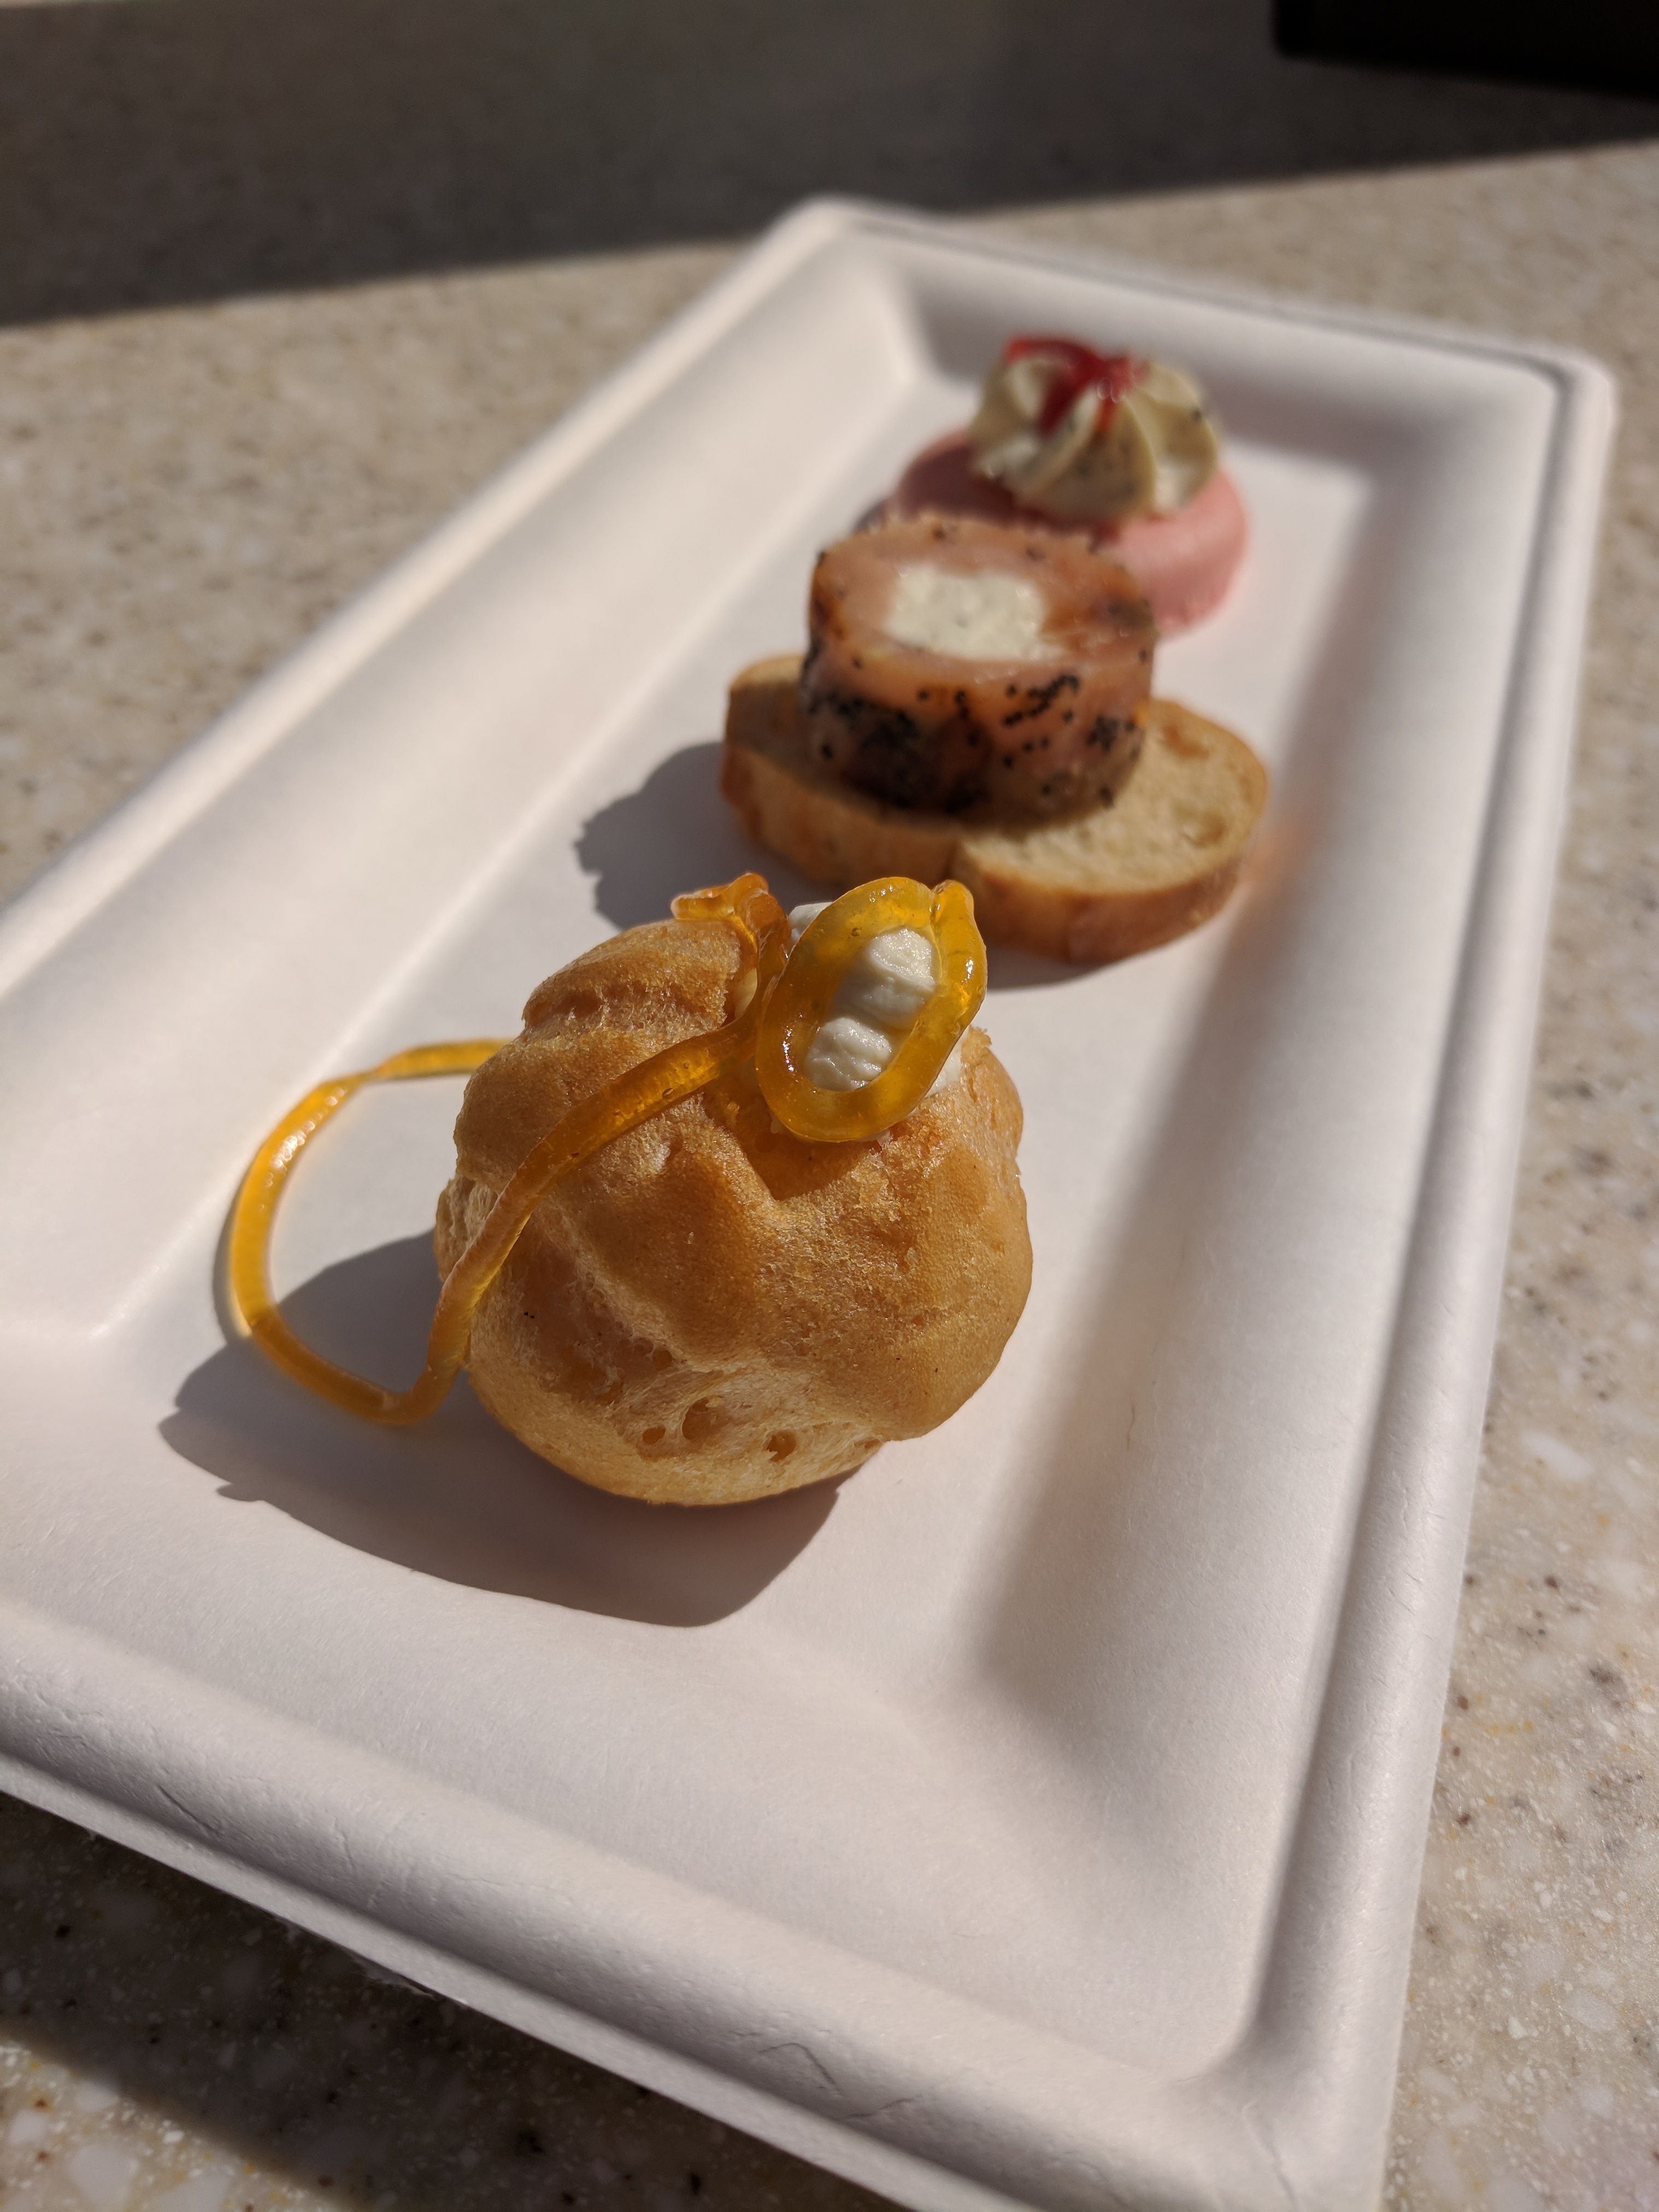 Cheese Studio: Cheese Trio: Profiterole topped with Boursin Garlic and Fine Herbs Cheese and Orange Apricot Jam; Smoked Salmon Pinwheel with Boursin Shallot and Chive Cheese and Everything Seasoning; Strawberry Macaron with Boursin Pepper Cheese